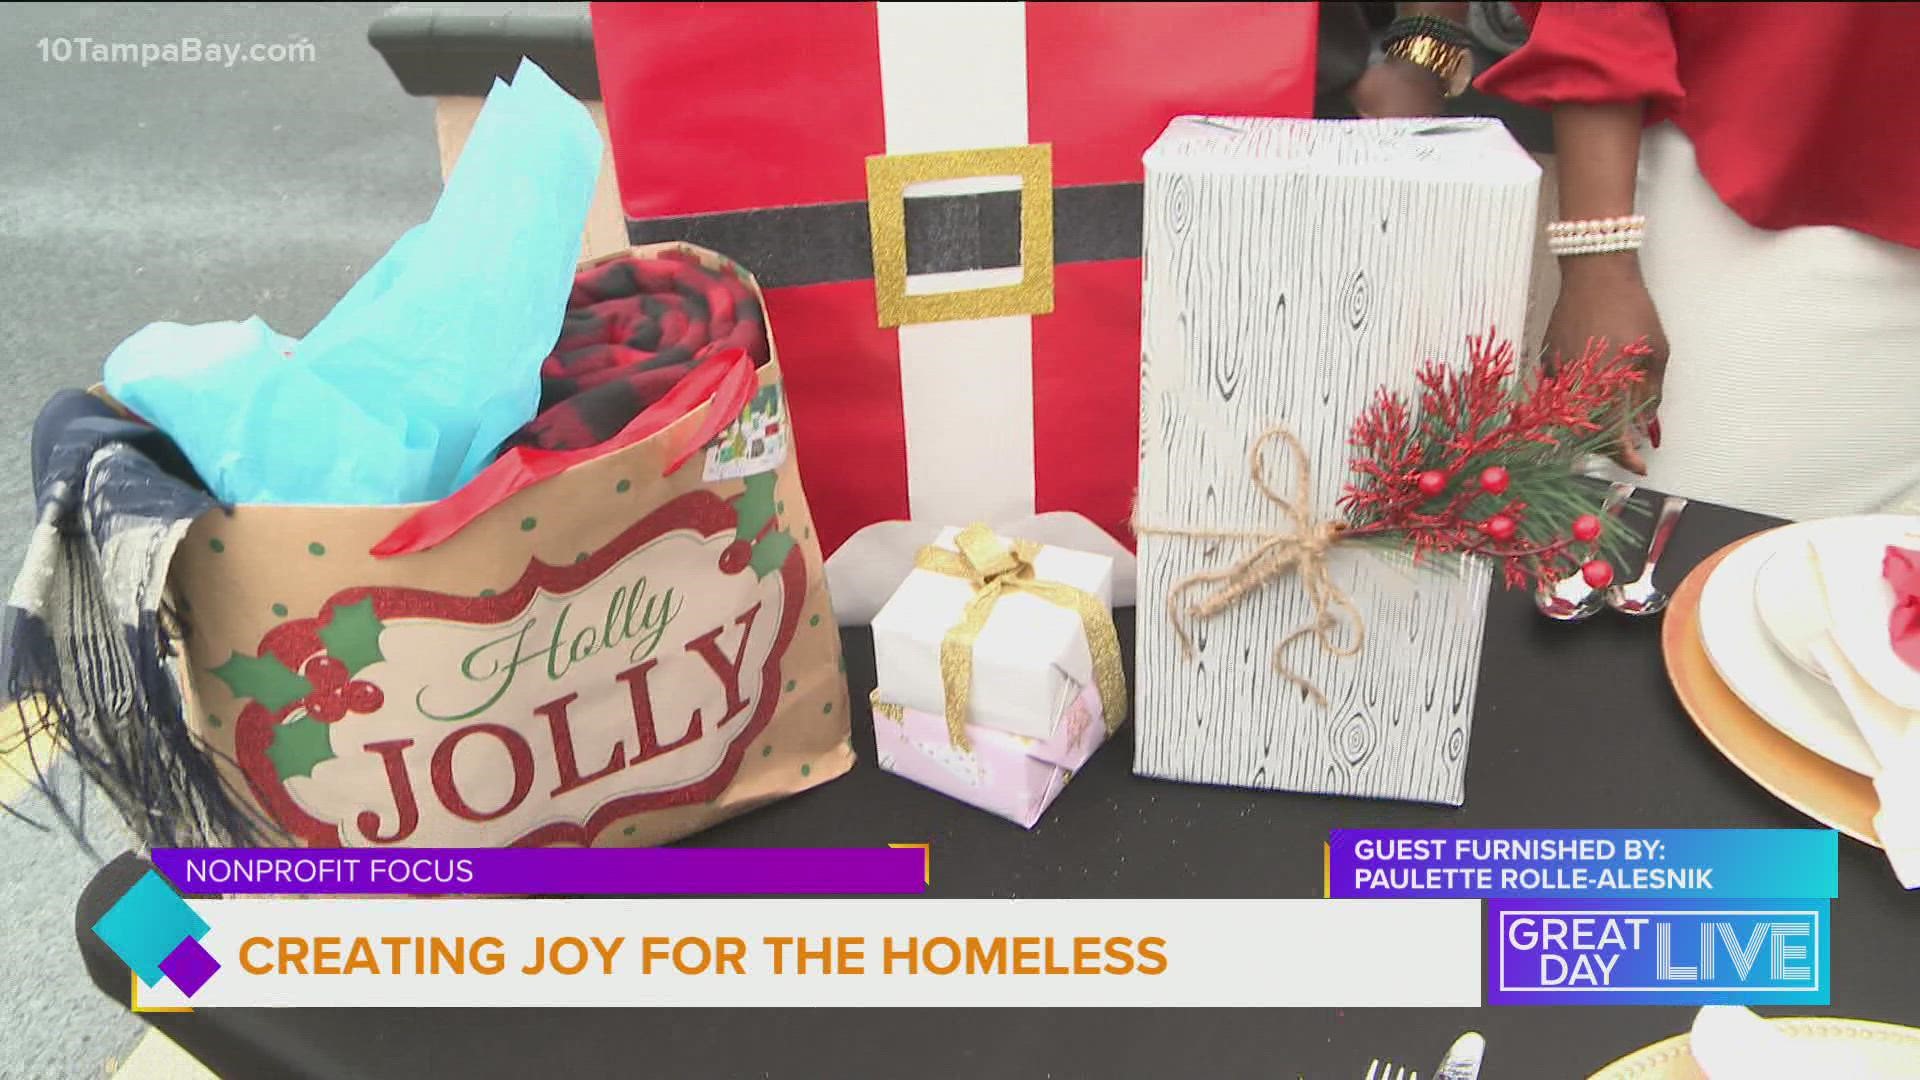 Every year Paulette Rolle-Alesnik throws a semi-formal banquet for the homeless community.